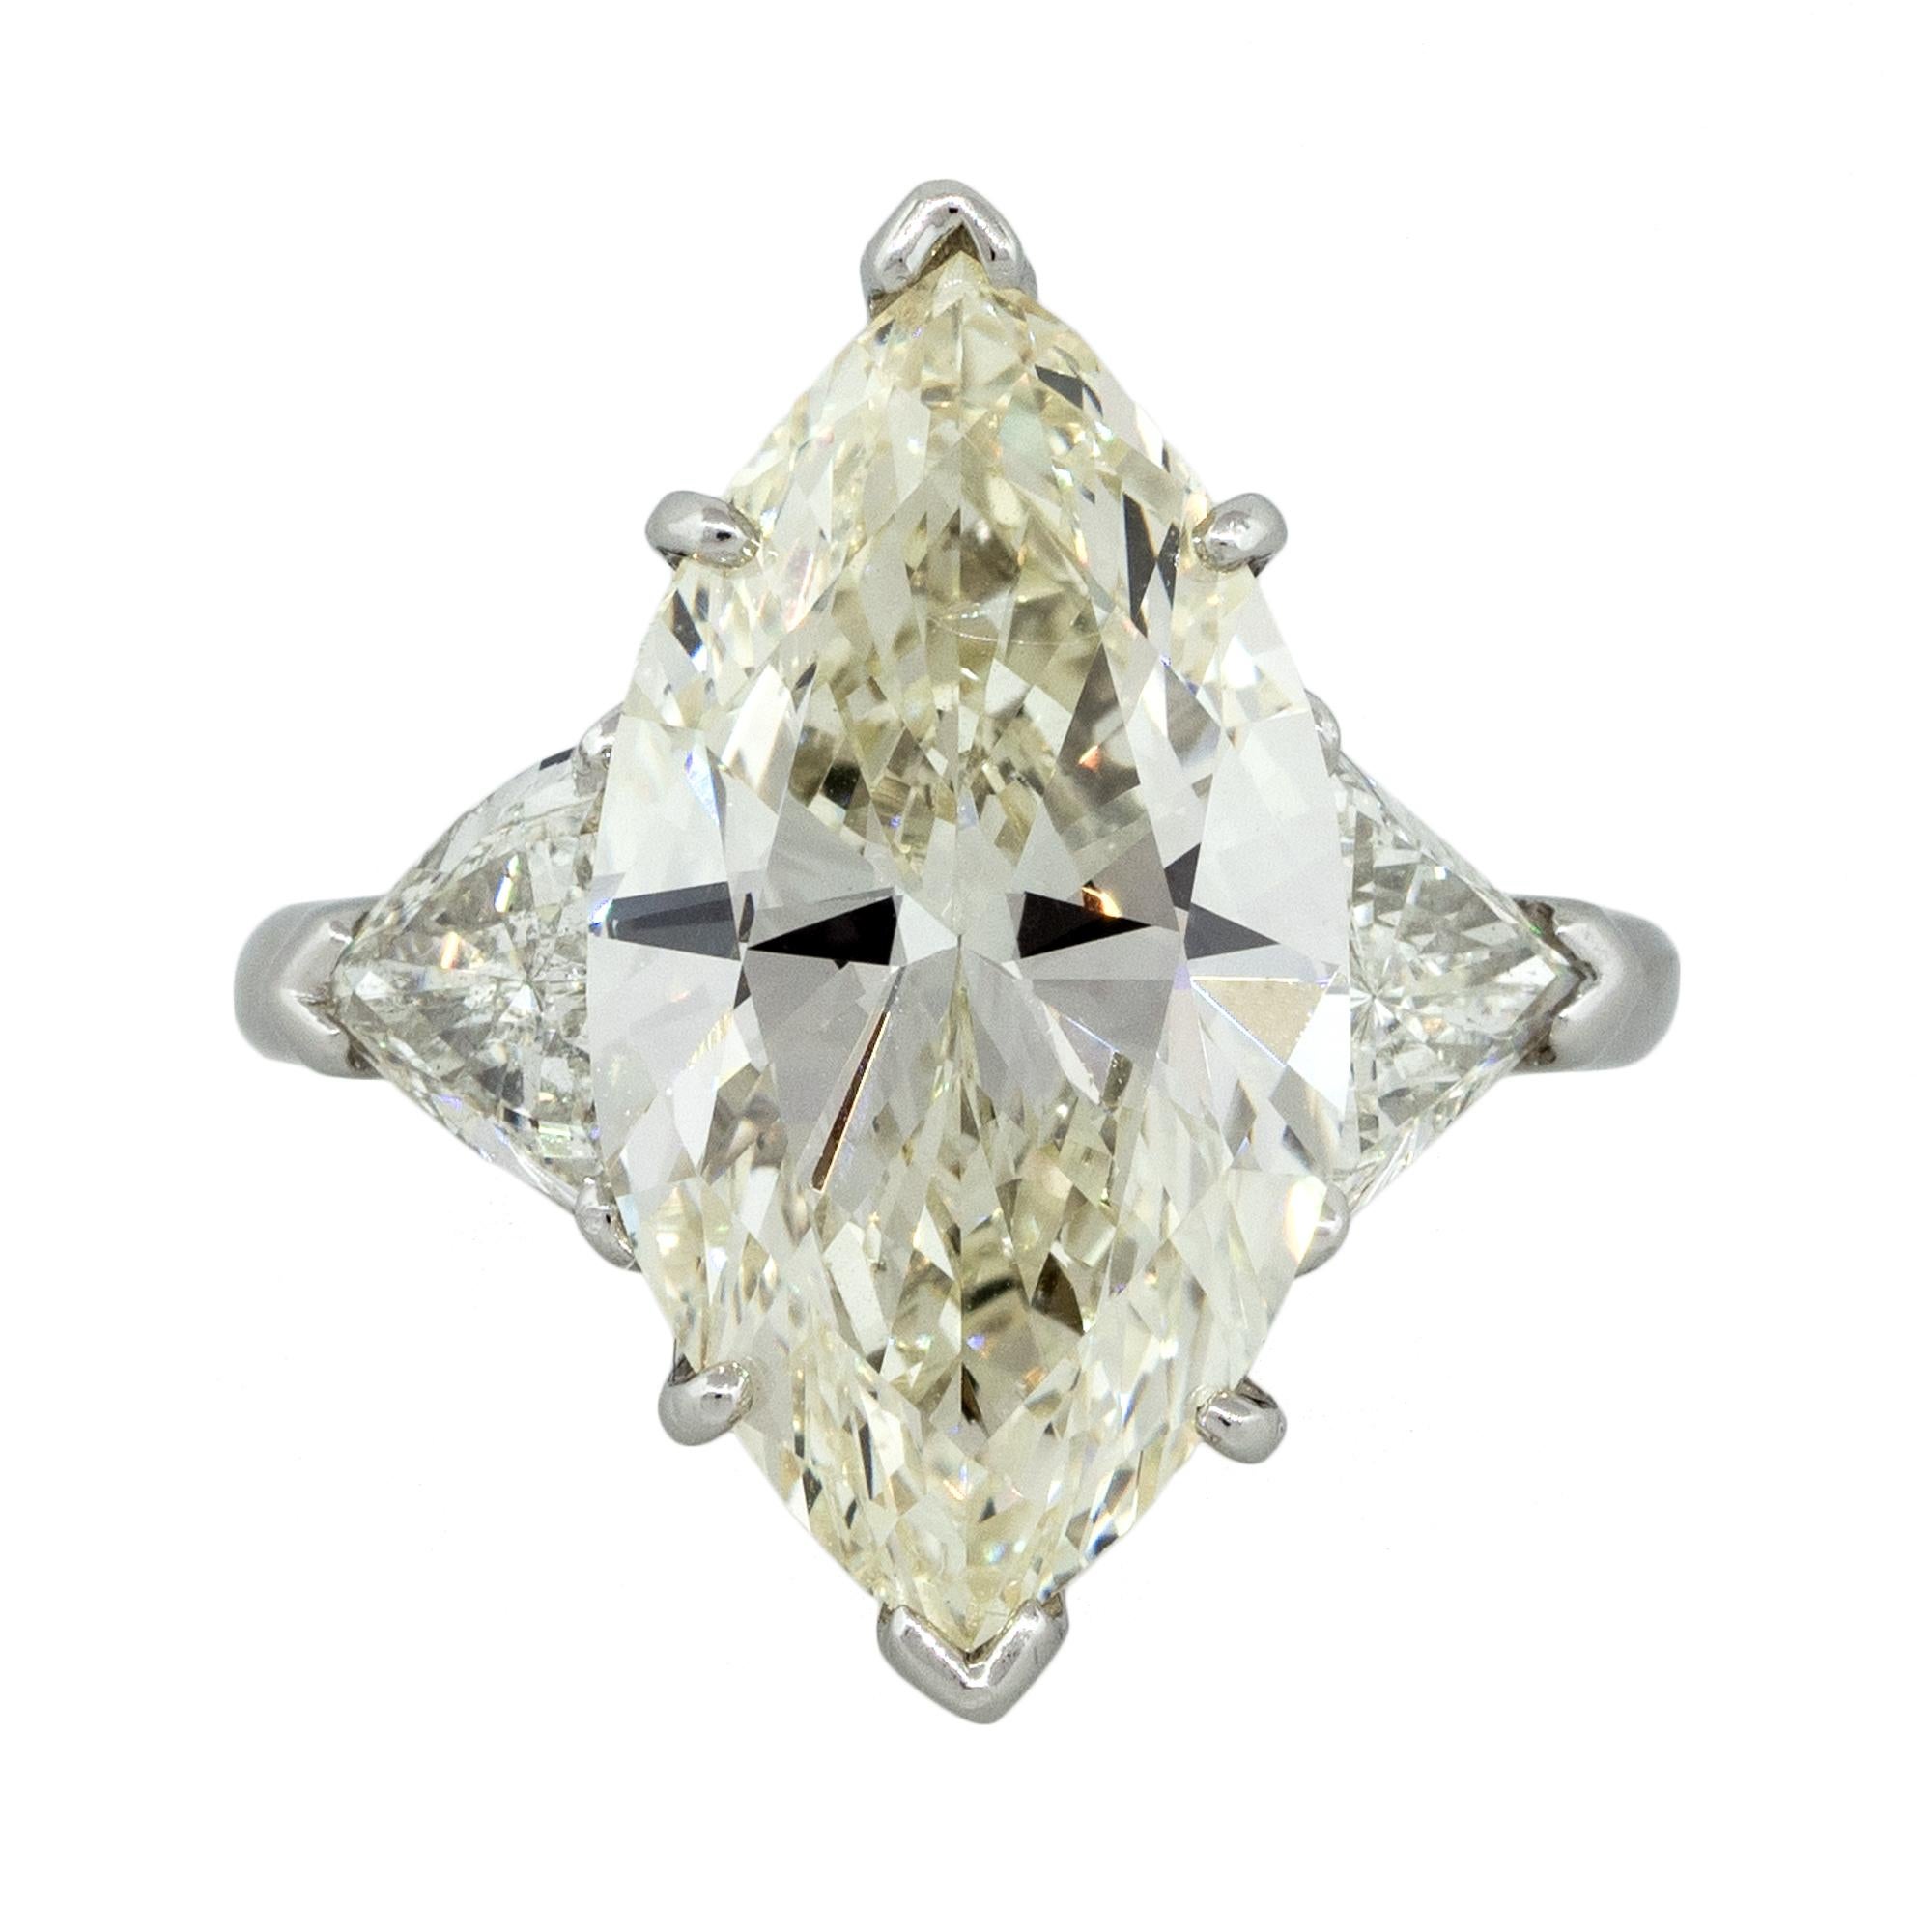 Main Diamond: Marquise Cut
GIA Report Number: 1152579414
Diamond Color: M
Diamond Clarity: SI1
Mounting Details: Platinum Setting With 2.00ctw of Trillion Cut Diamonds. Diamonds are H/I in Color and SI in Clarity
Mounting Size: Size 6.5 (Can be